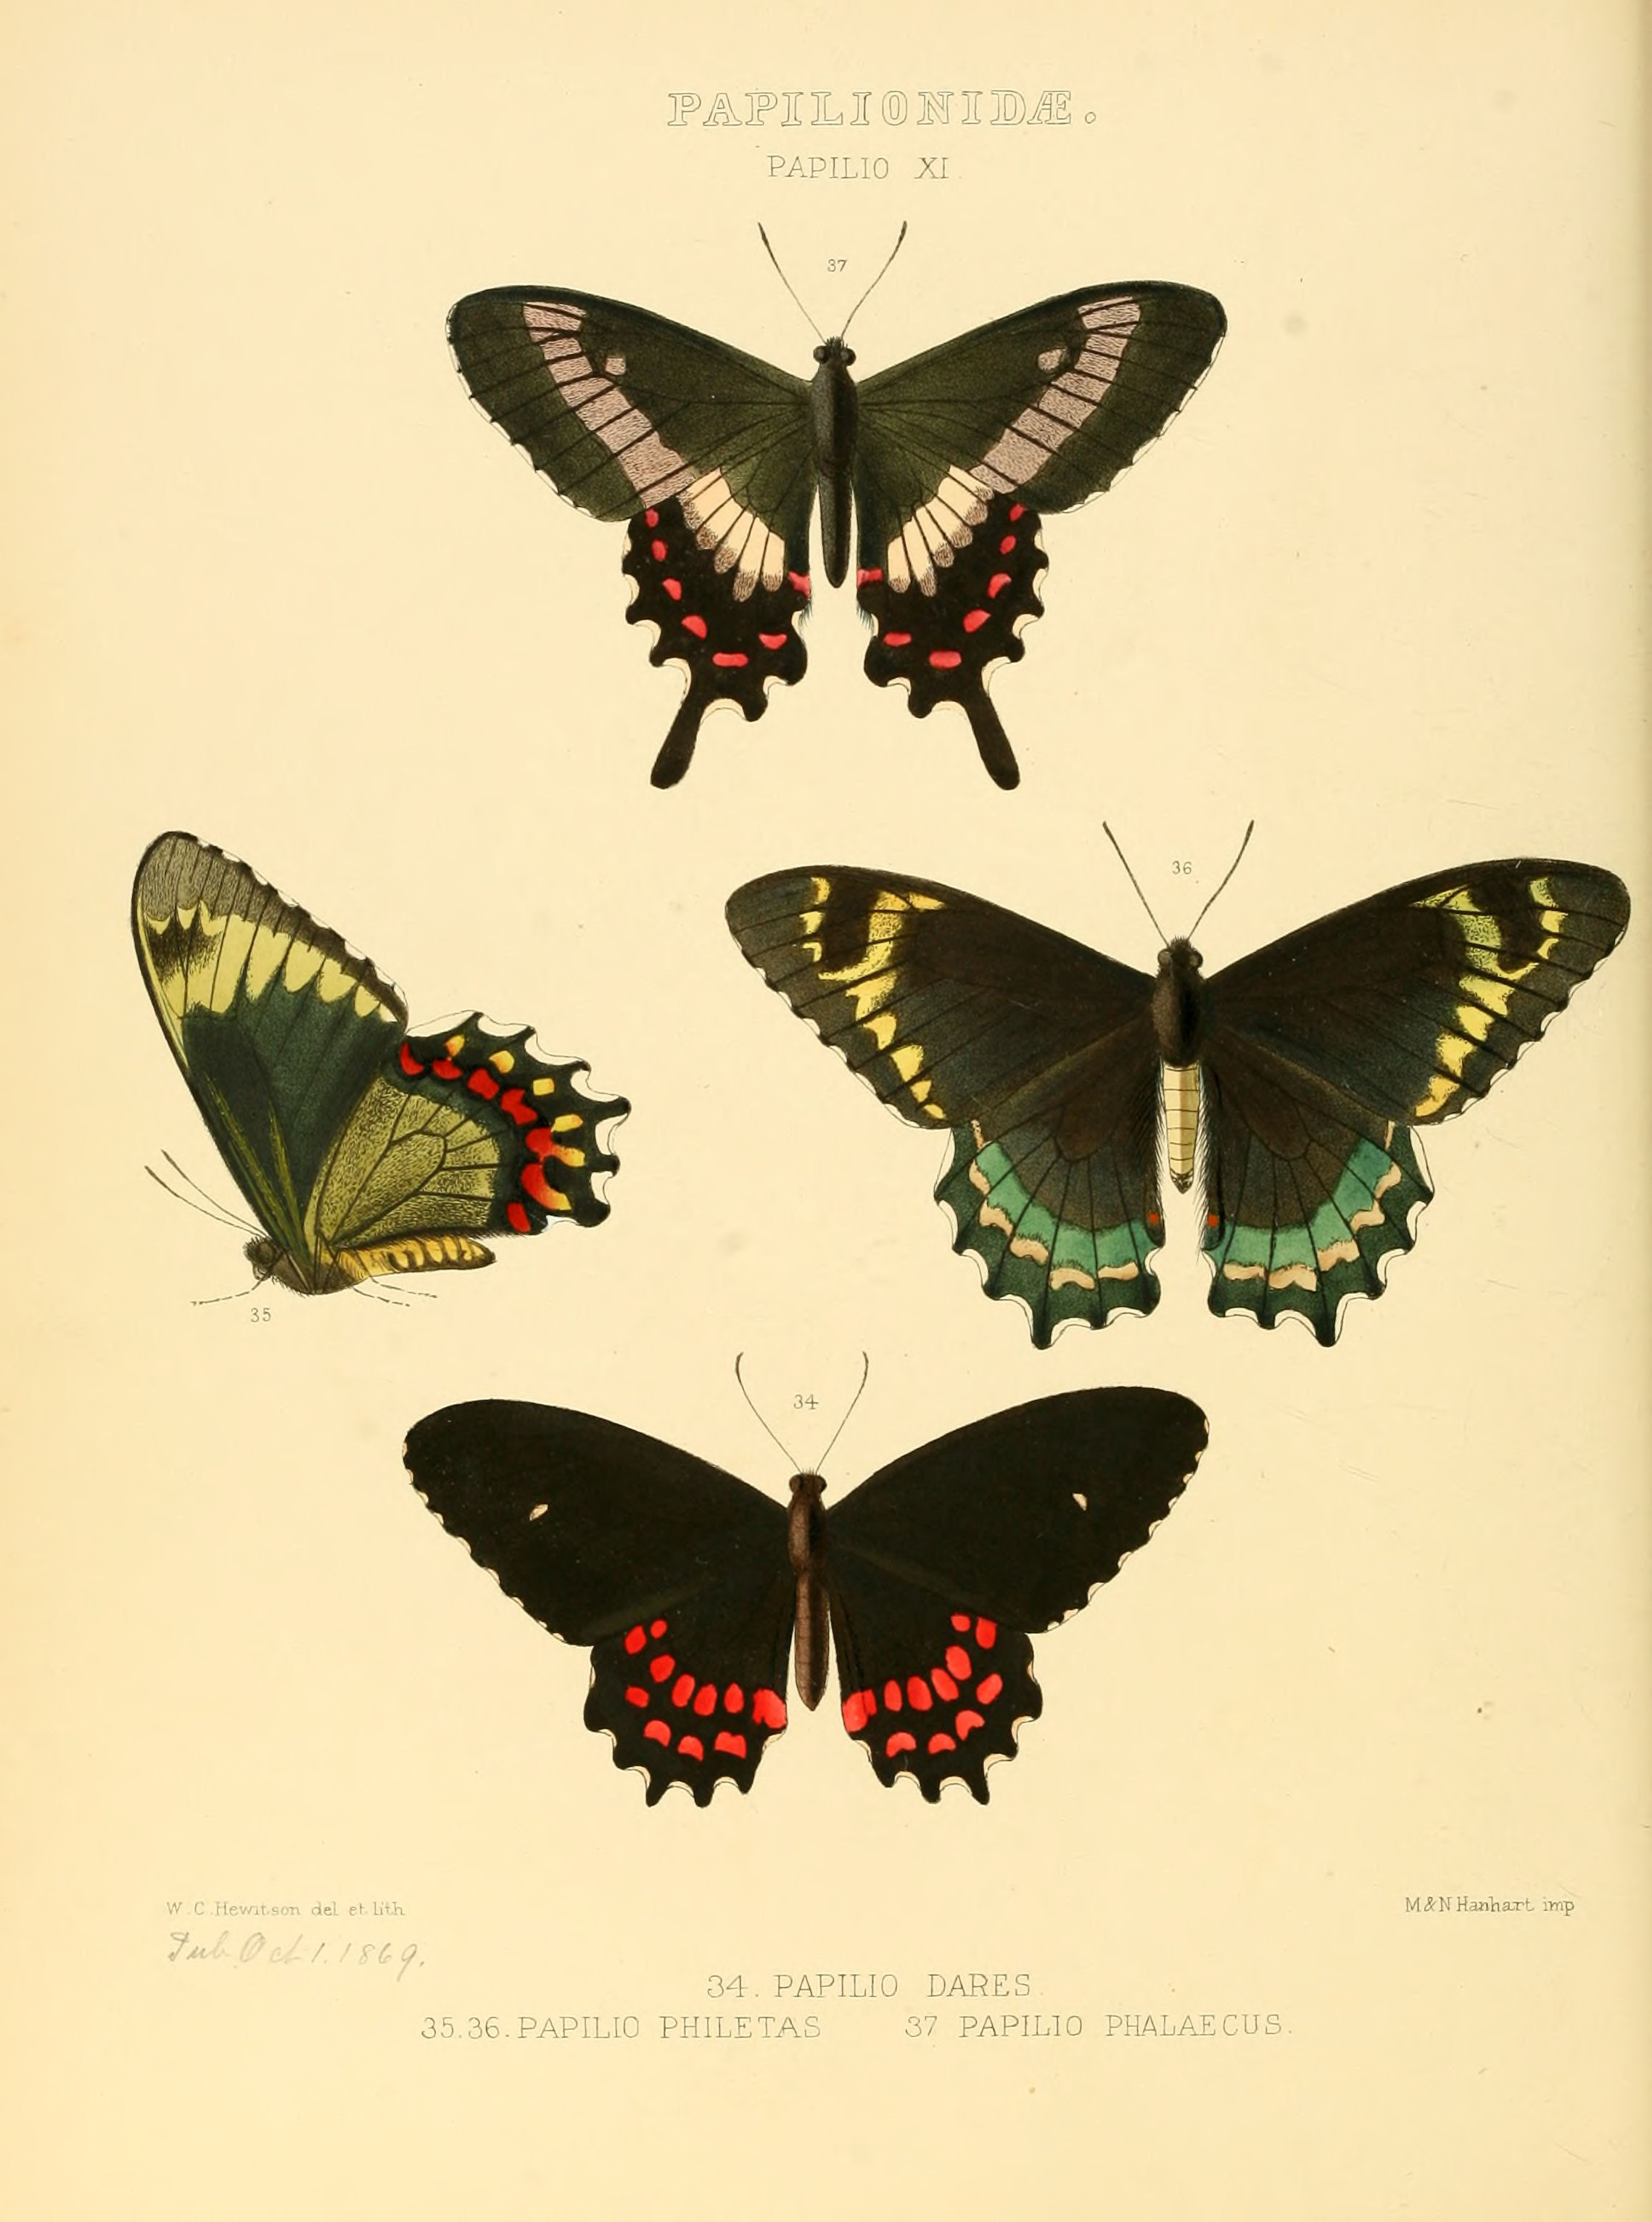 Illustrations of new species of exotic butterflies Papilio XI